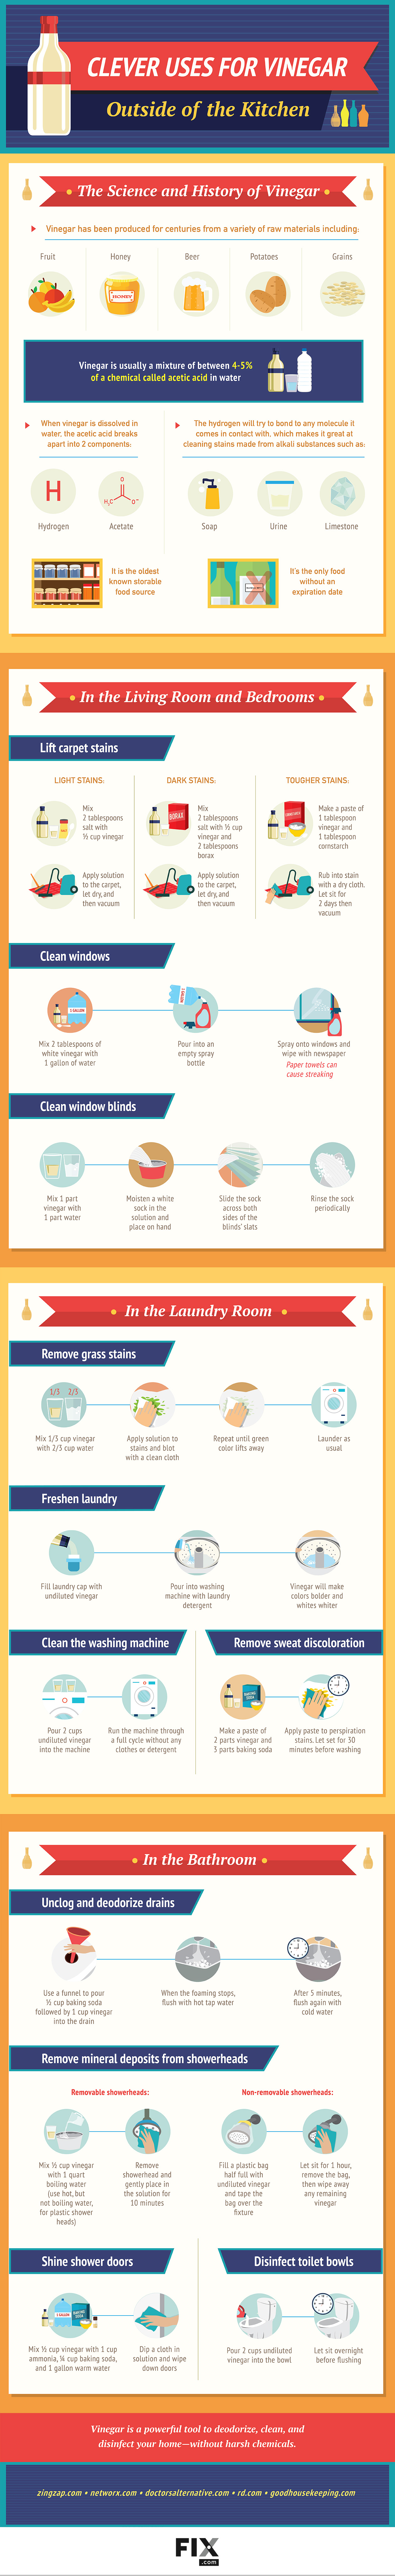 Clever uses for vinegar infographic